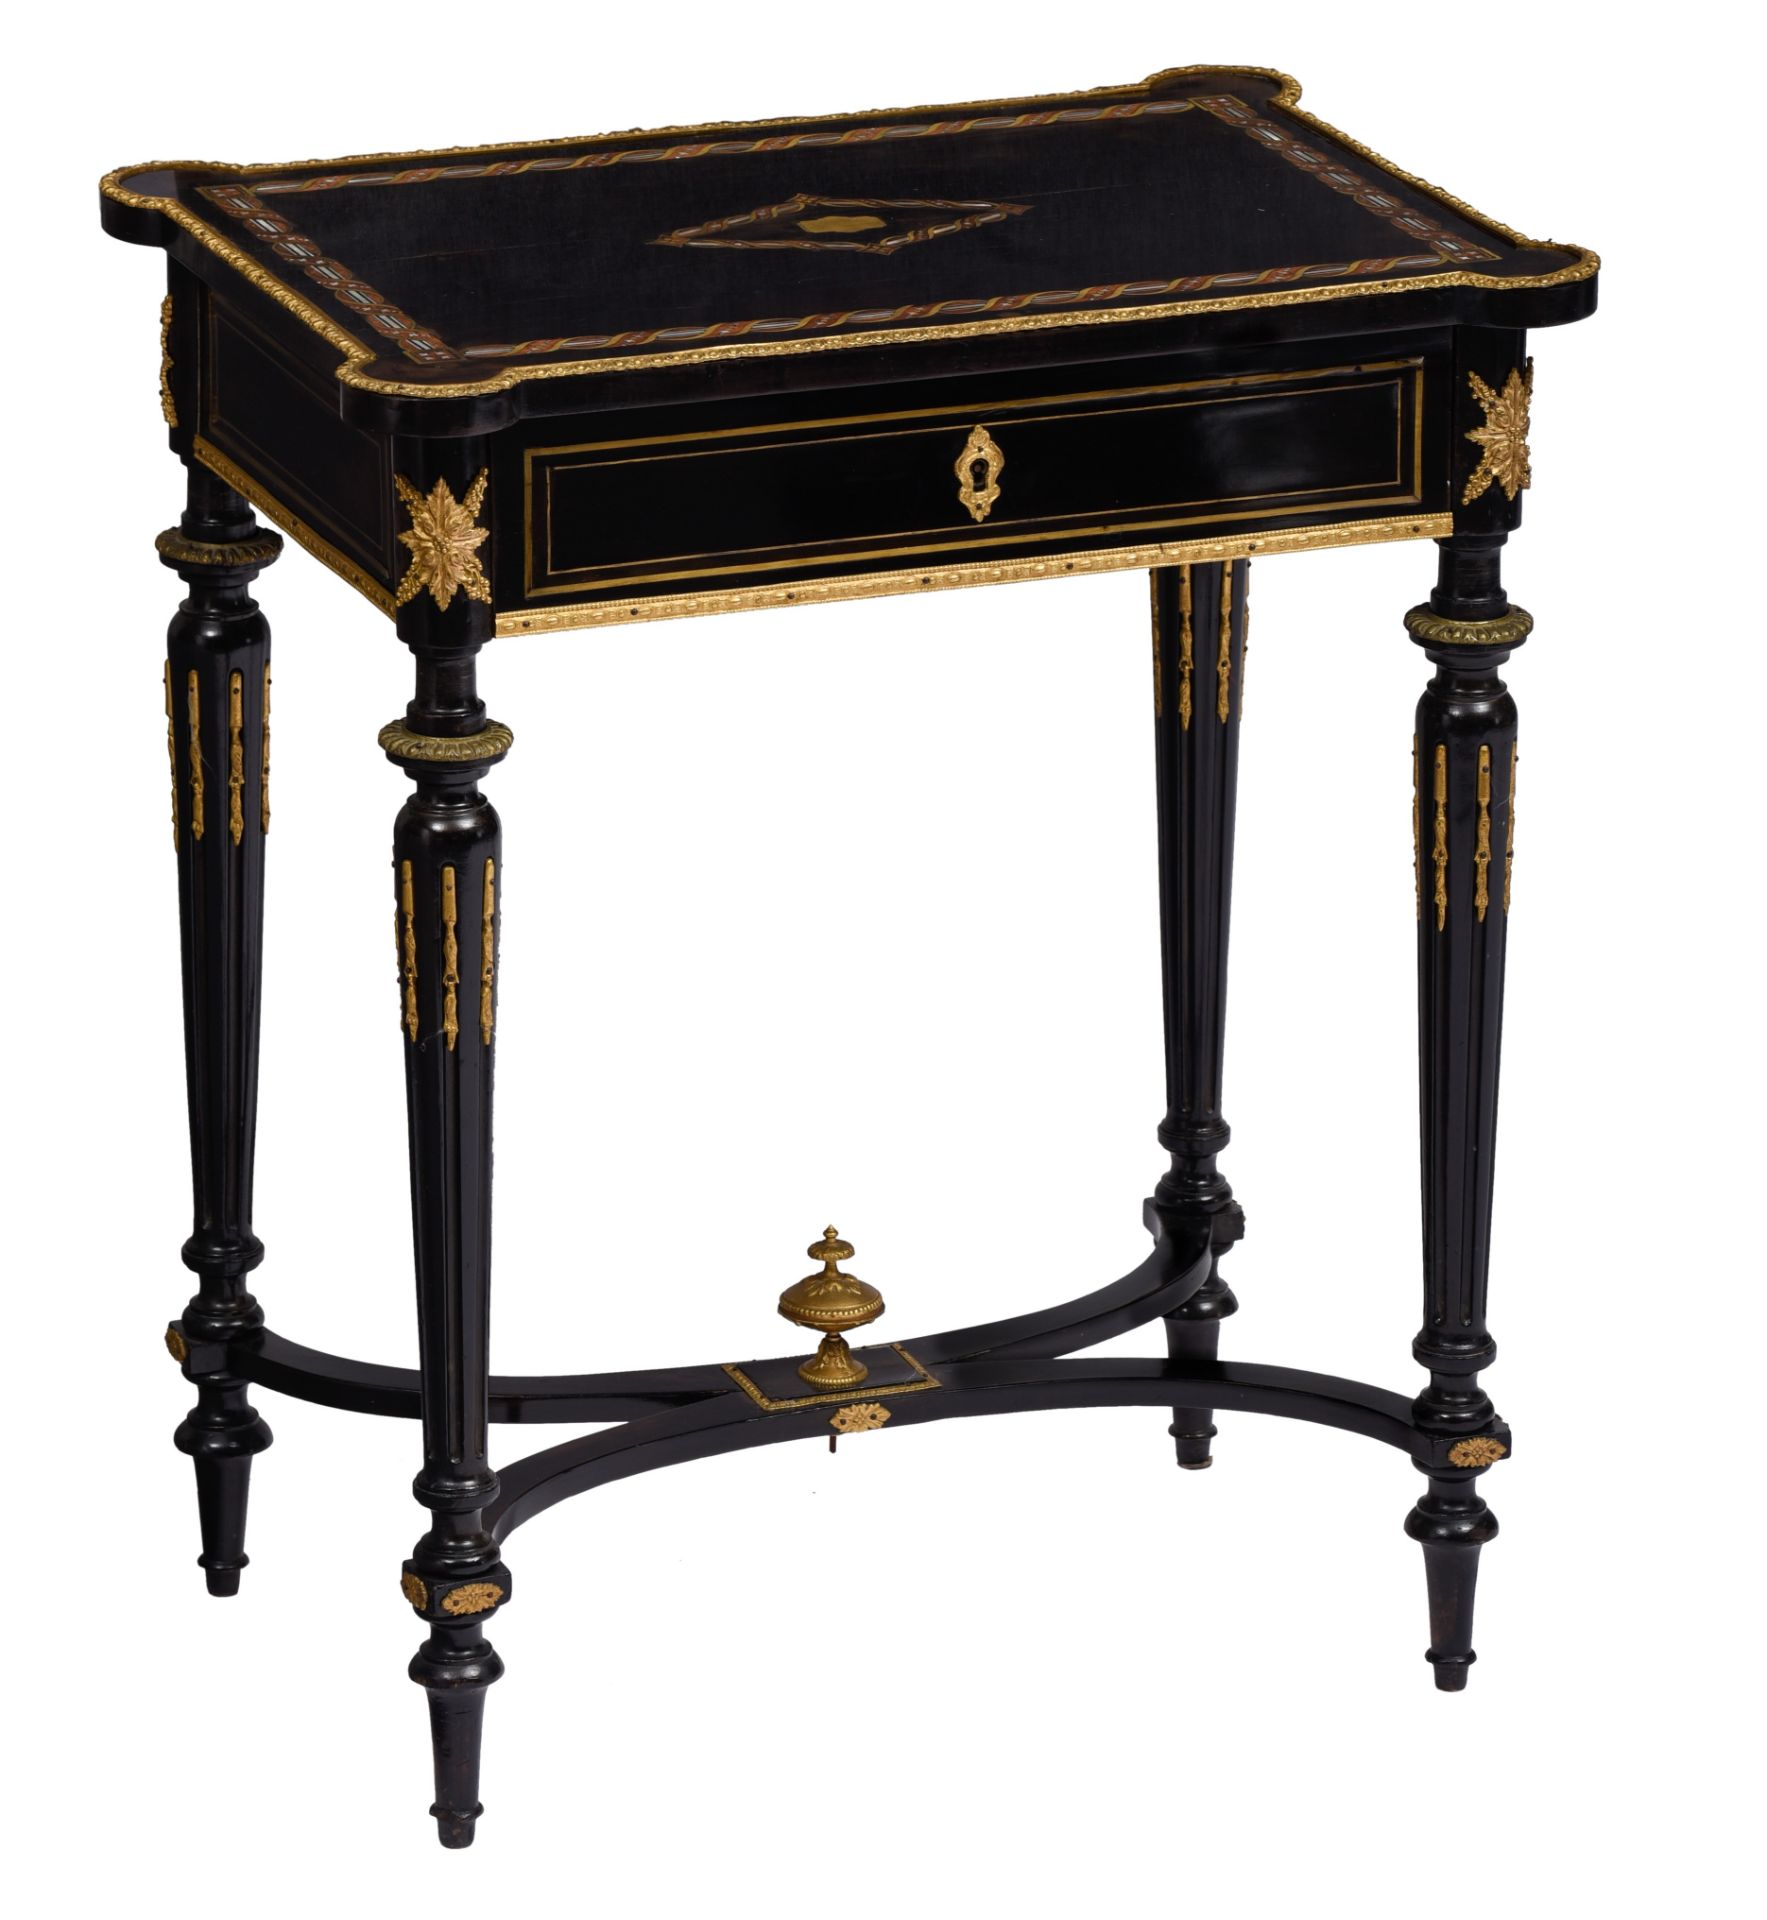 A Neoclassical Napoleon III ladies sewing table, H 73,5 - W 63 - D 44 cm